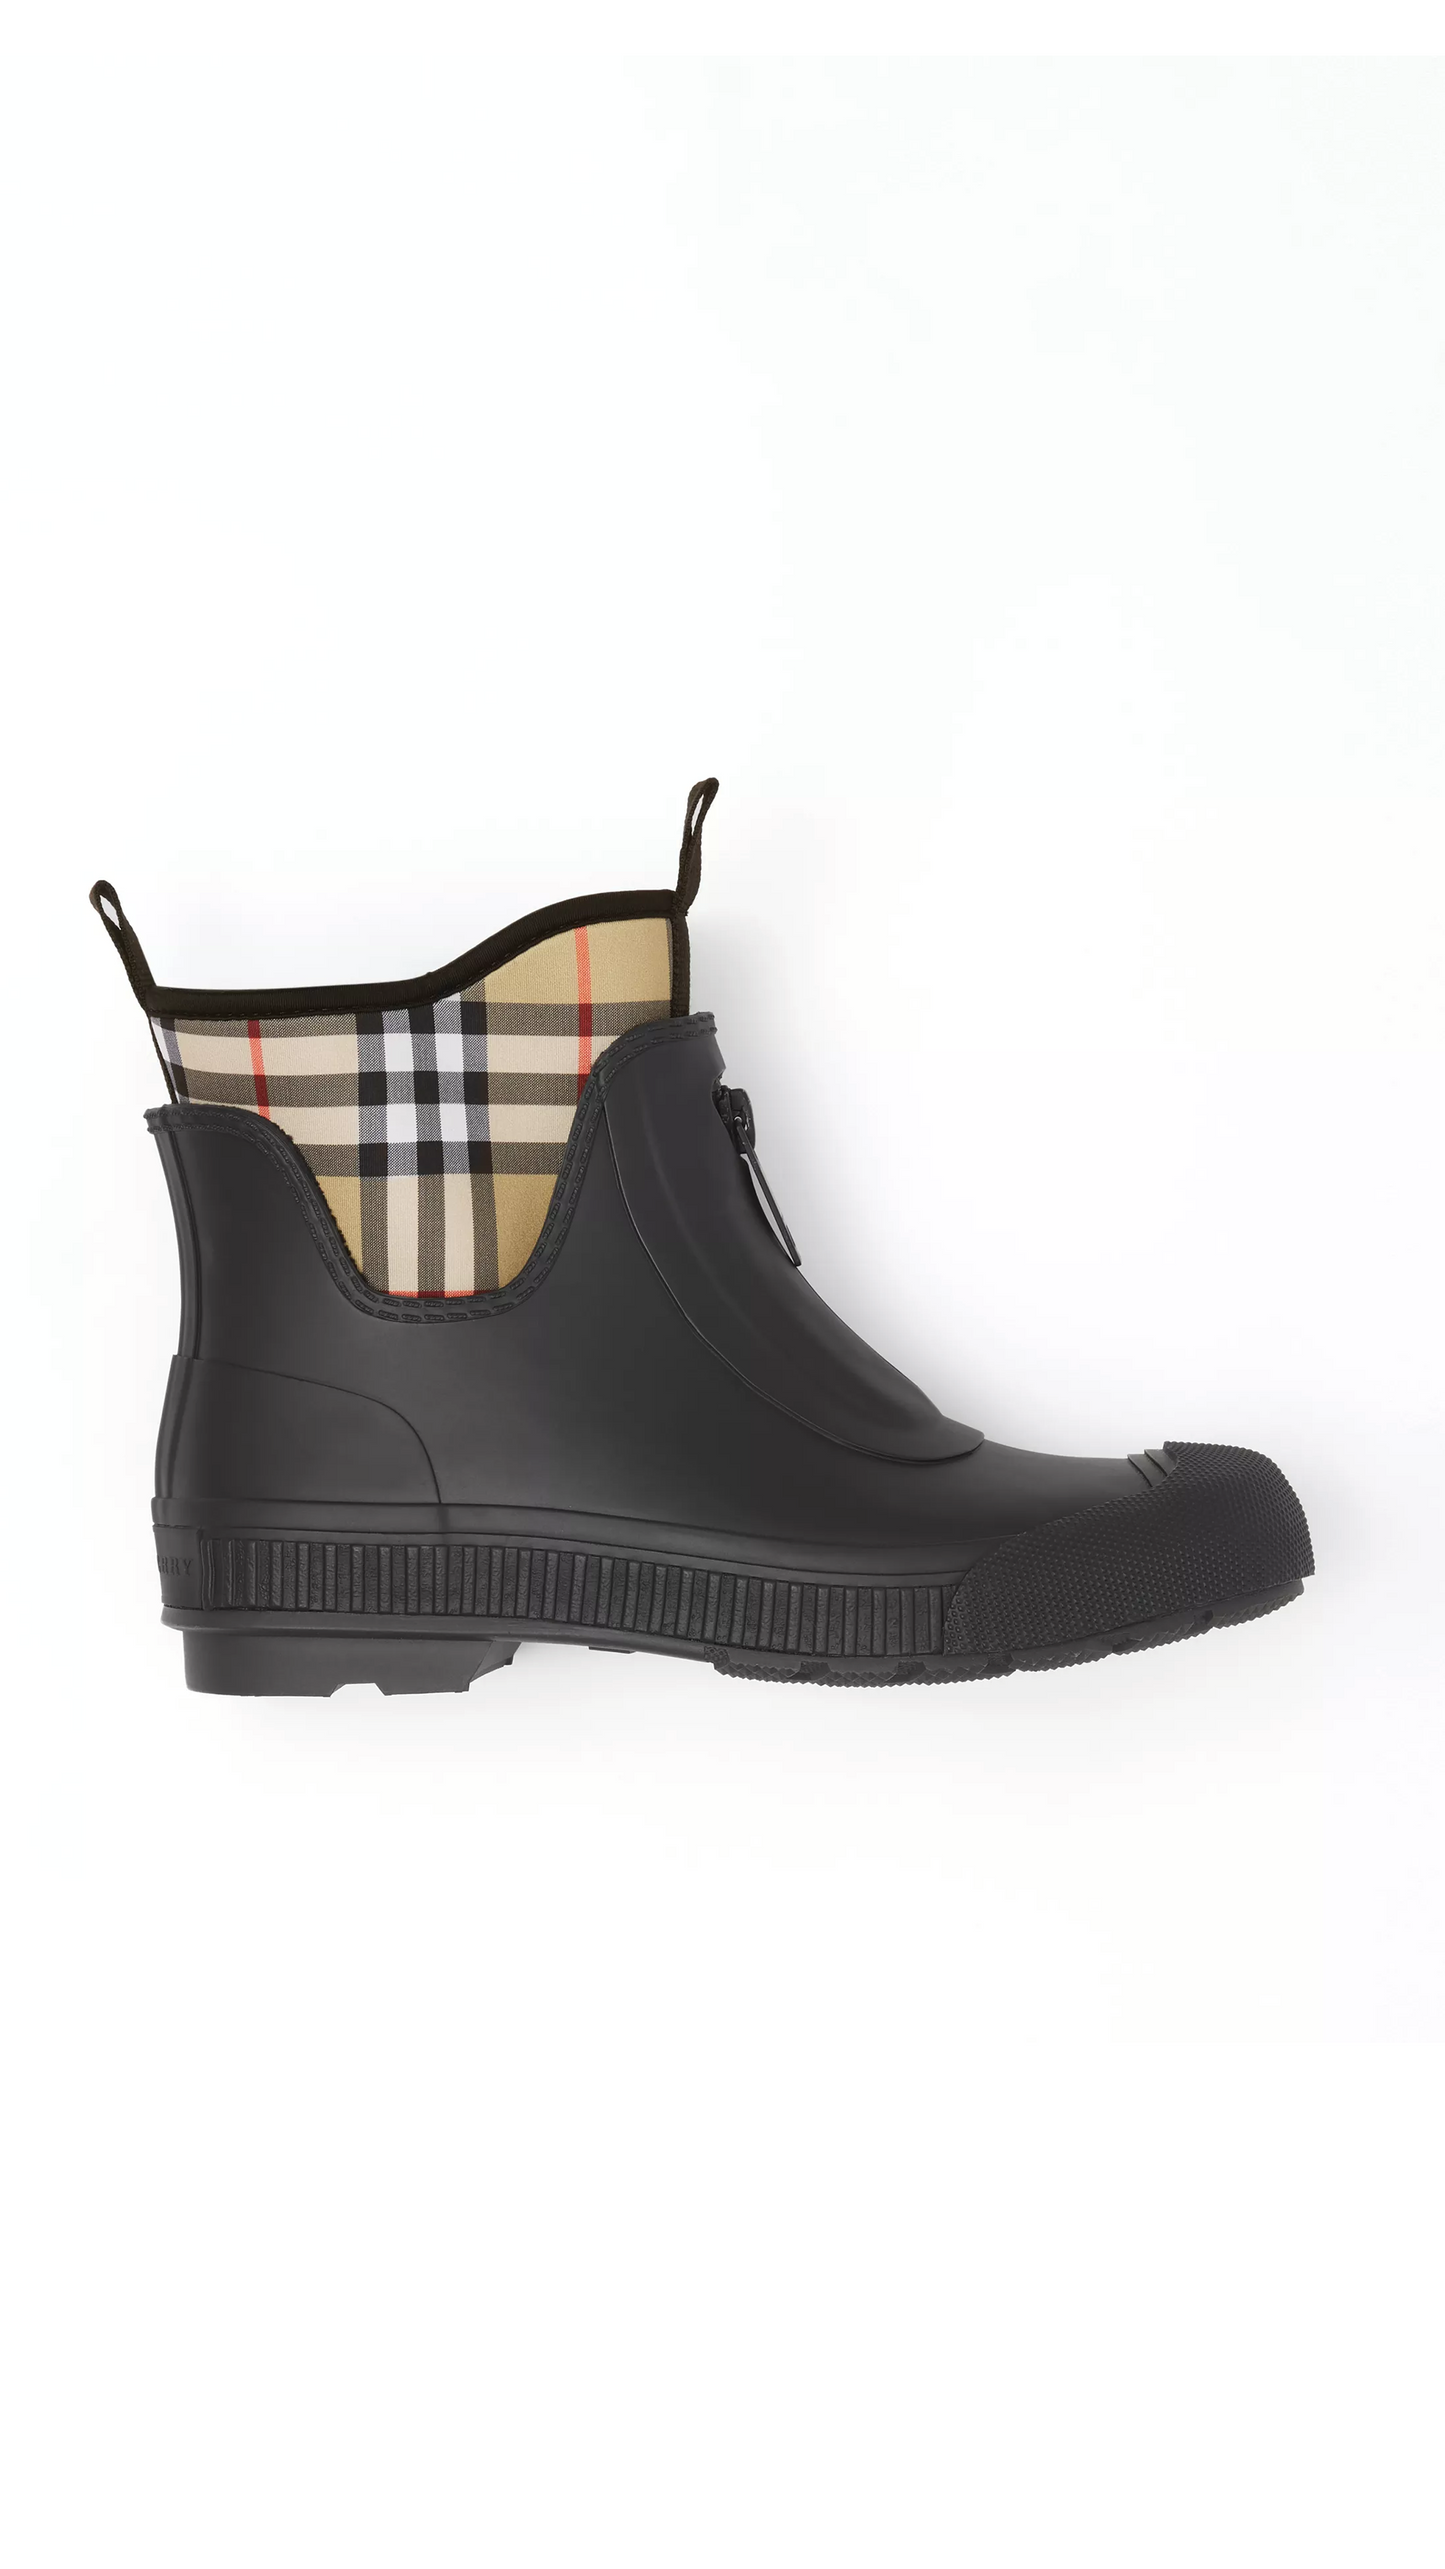 Vintage Check Neoprene and Rubber Rain Boots - Black / Archive Beige